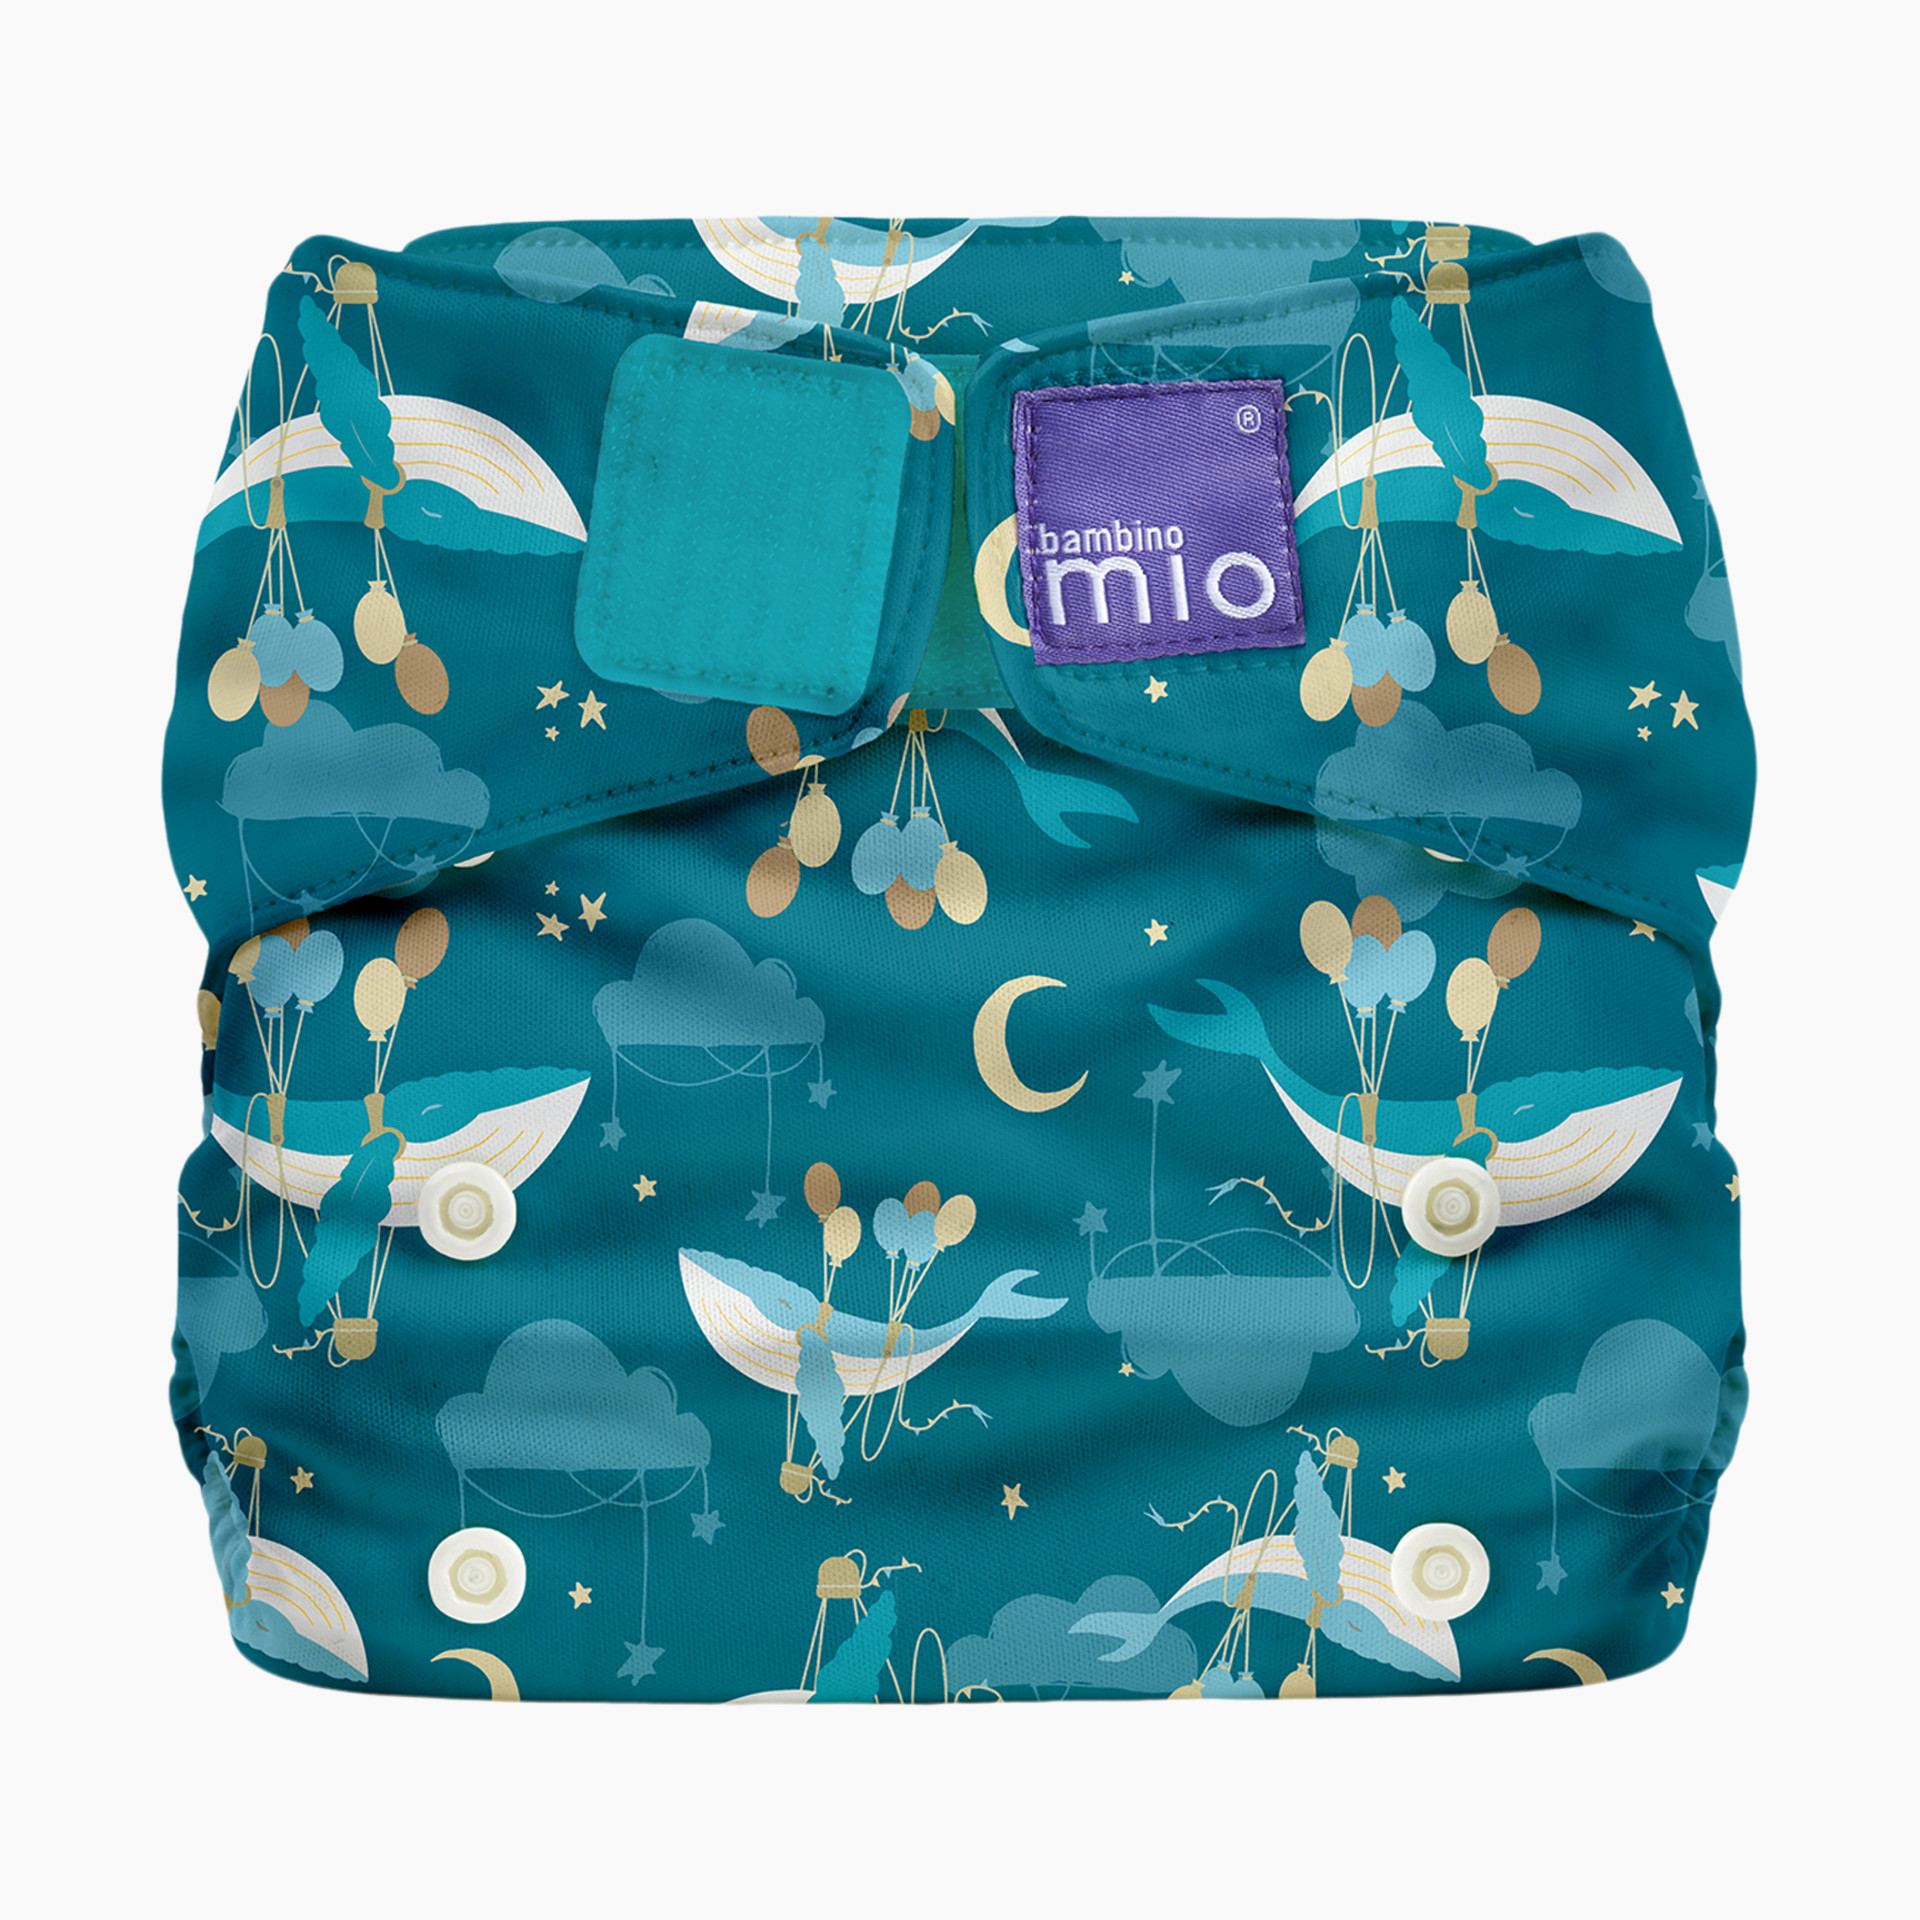 miosolo Classic All-In-One Reusable diaper